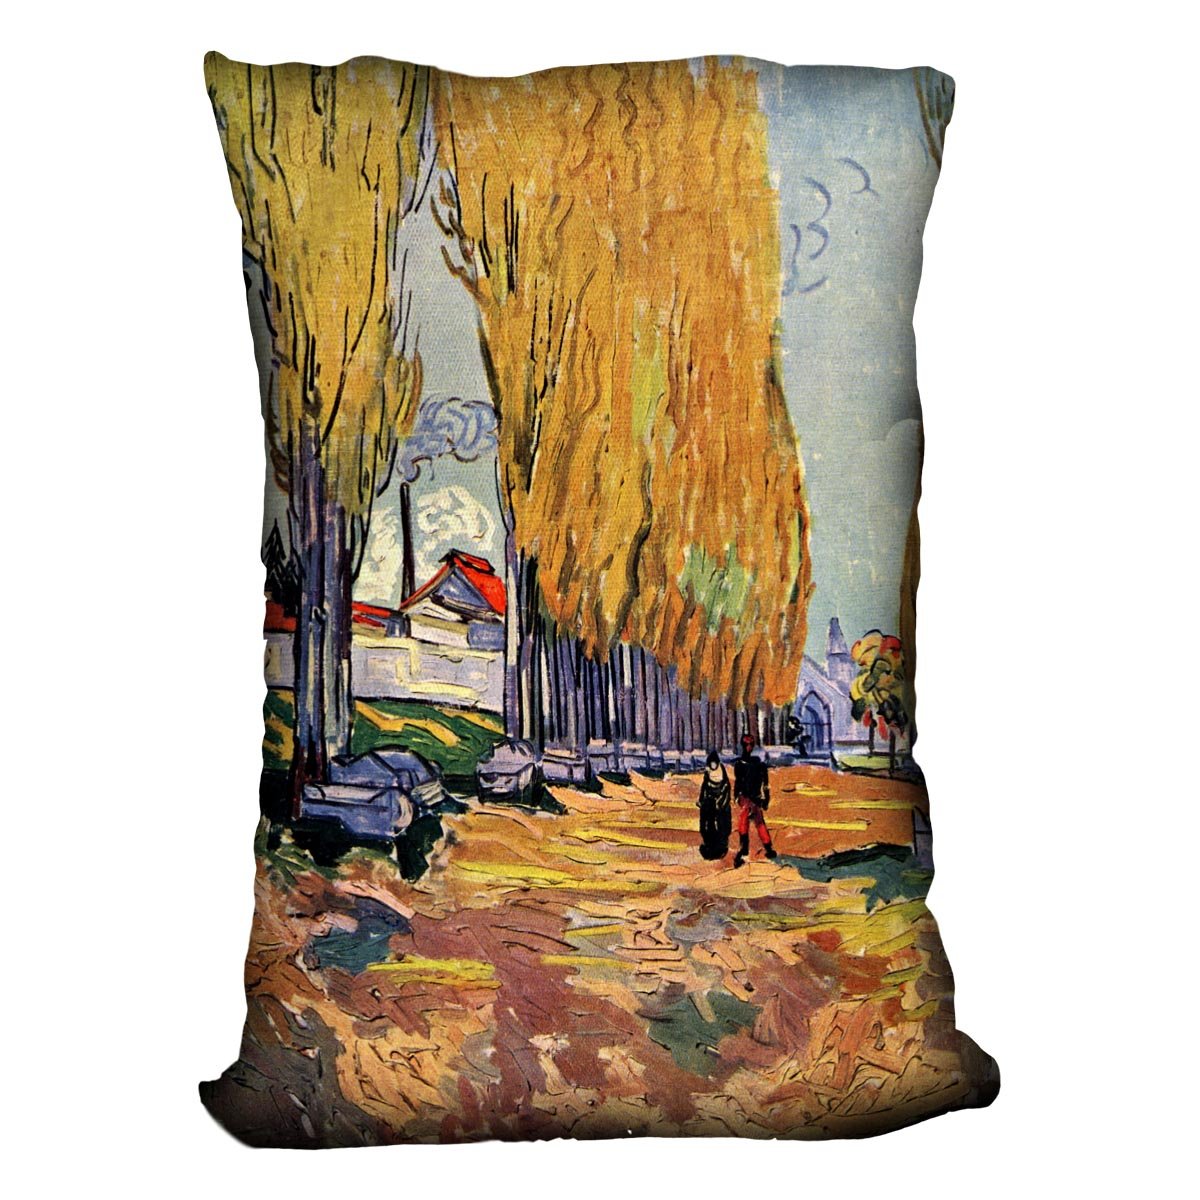 Les Alyscamps by Van Gogh Throw Pillow